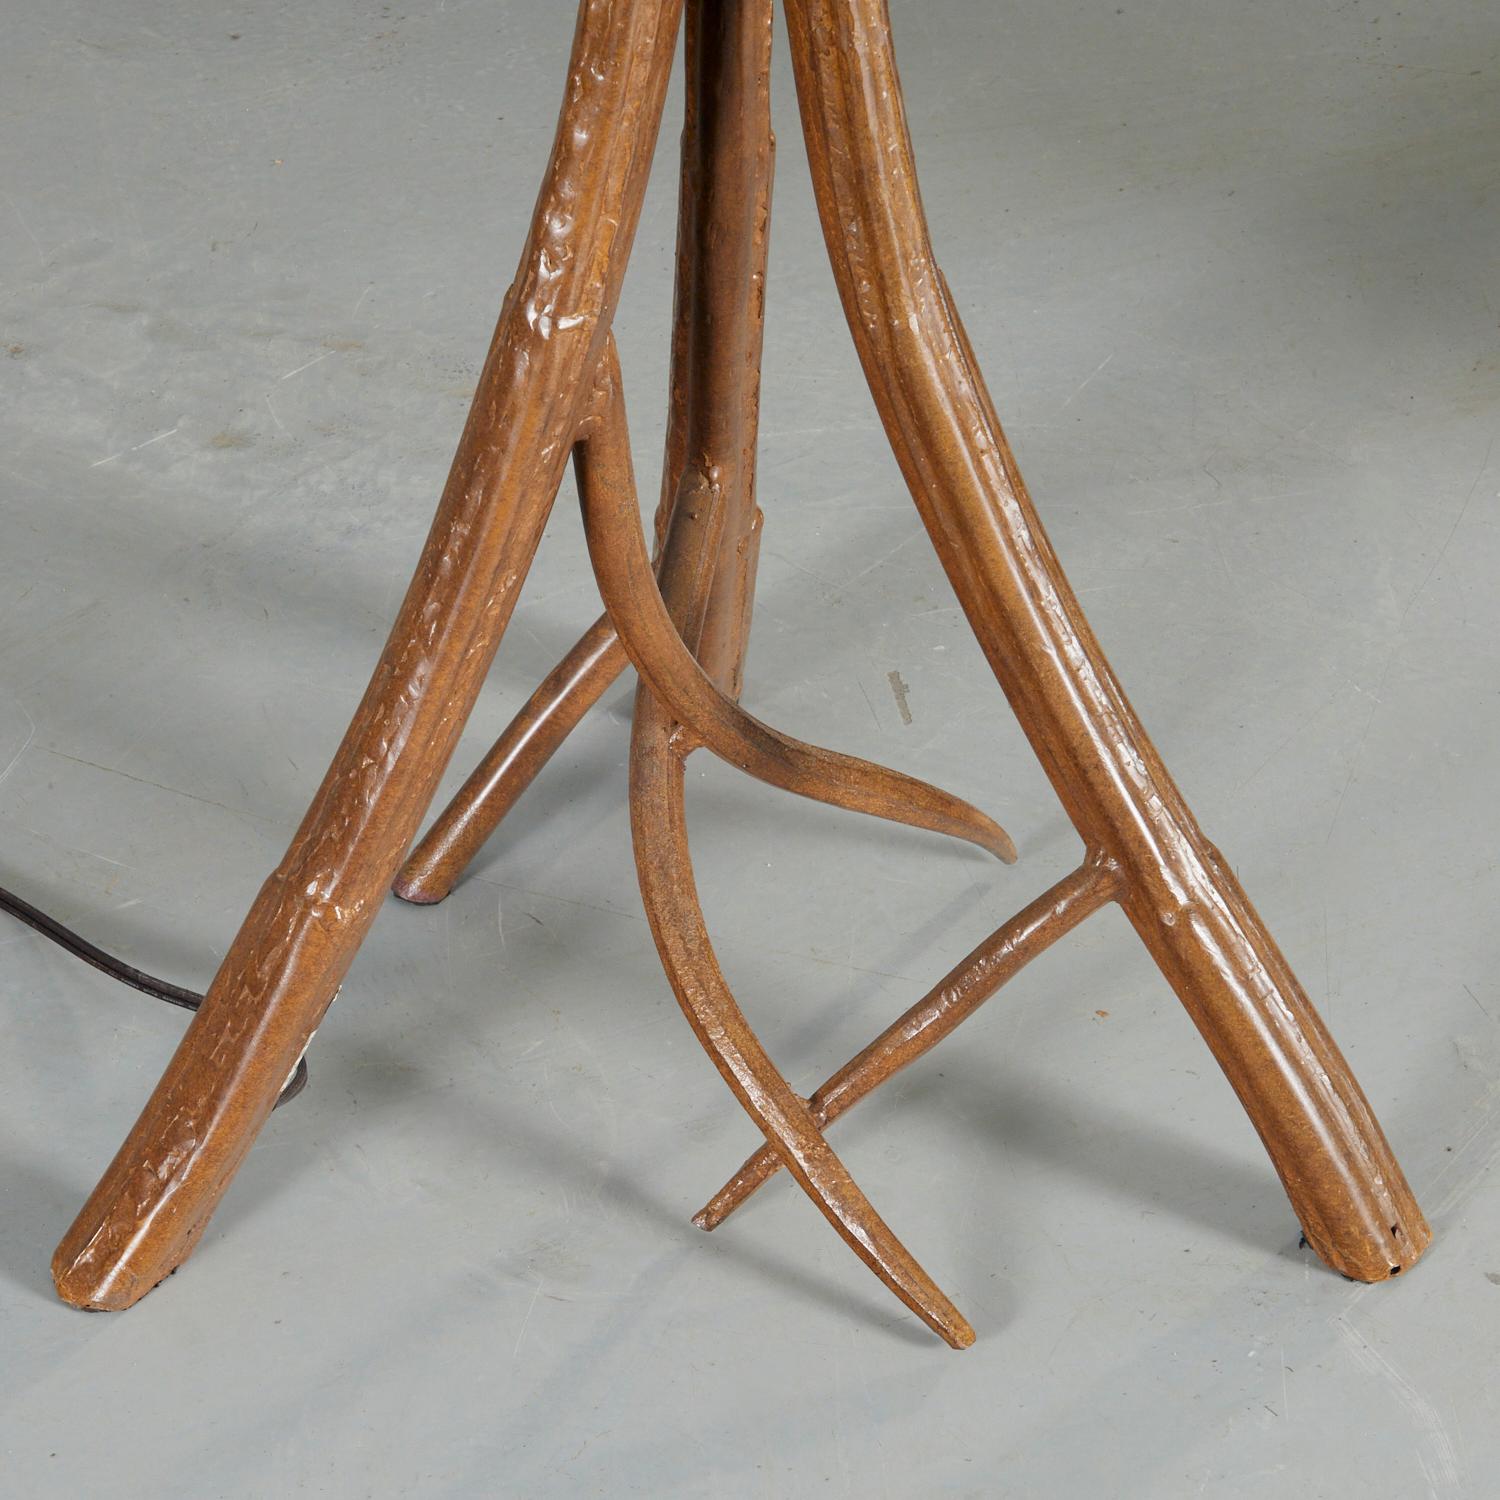 Contemporary Faux Bois Torchiere Floor Lamp with Fir Pine Cones and Needles In Good Condition For Sale In Morristown, NJ